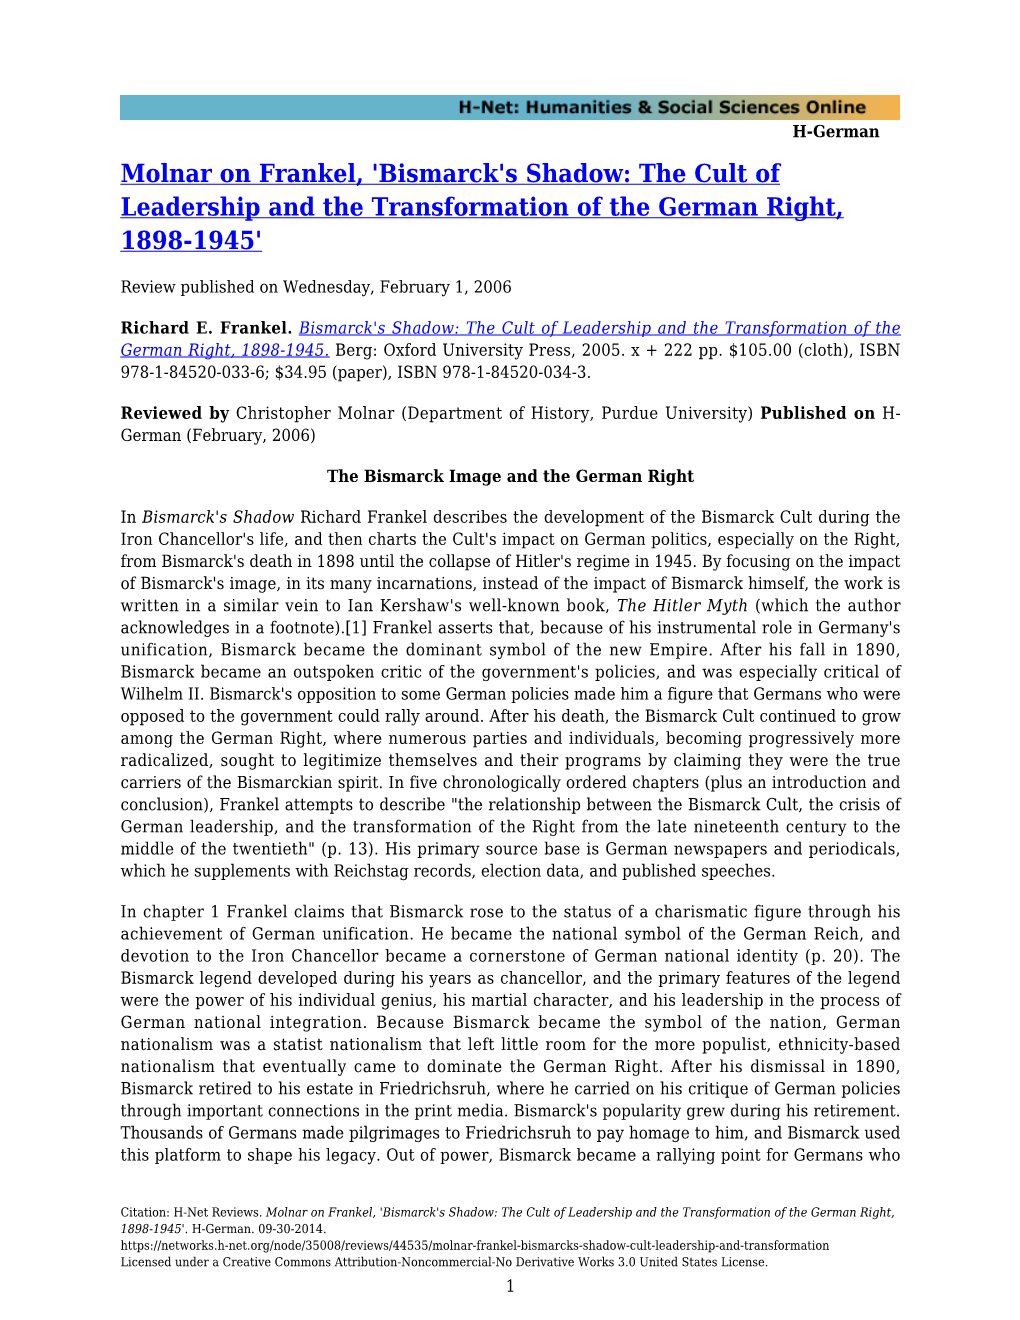 Molnar on Frankel, 'Bismarck's Shadow: the Cult of Leadership and the Transformation of the German Right, 1898-1945'